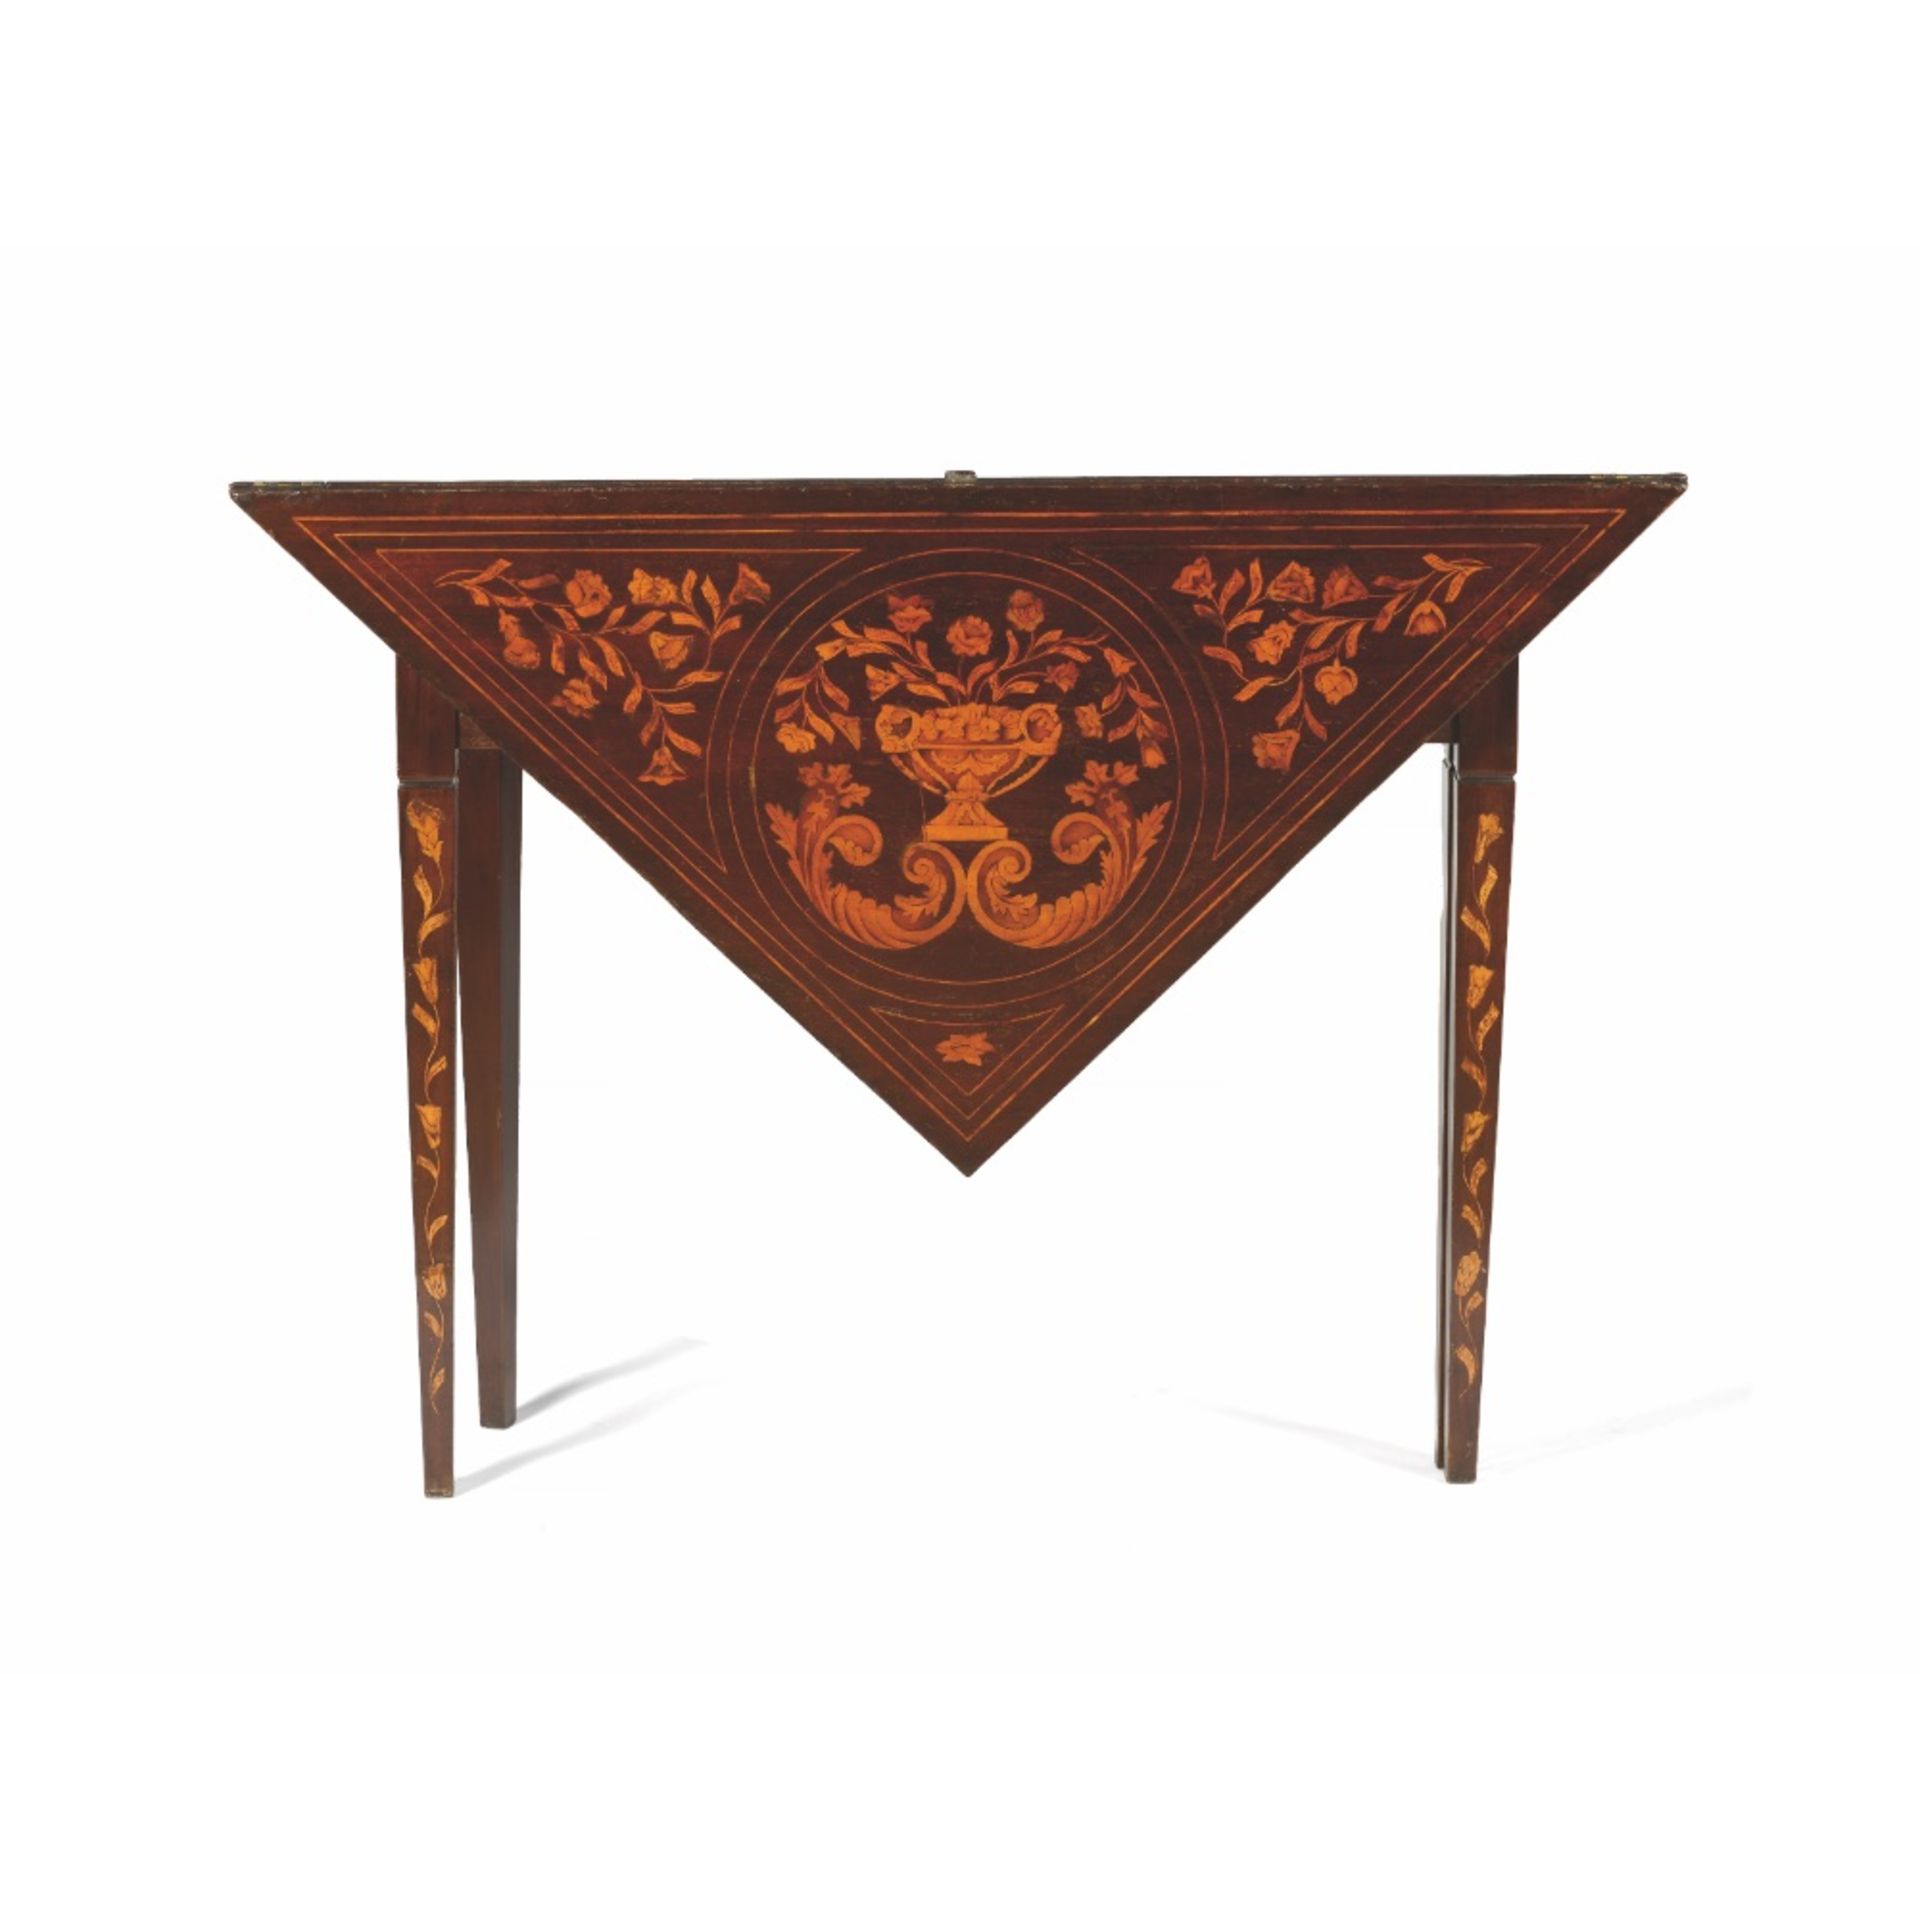 A triangular Neoclassical games table